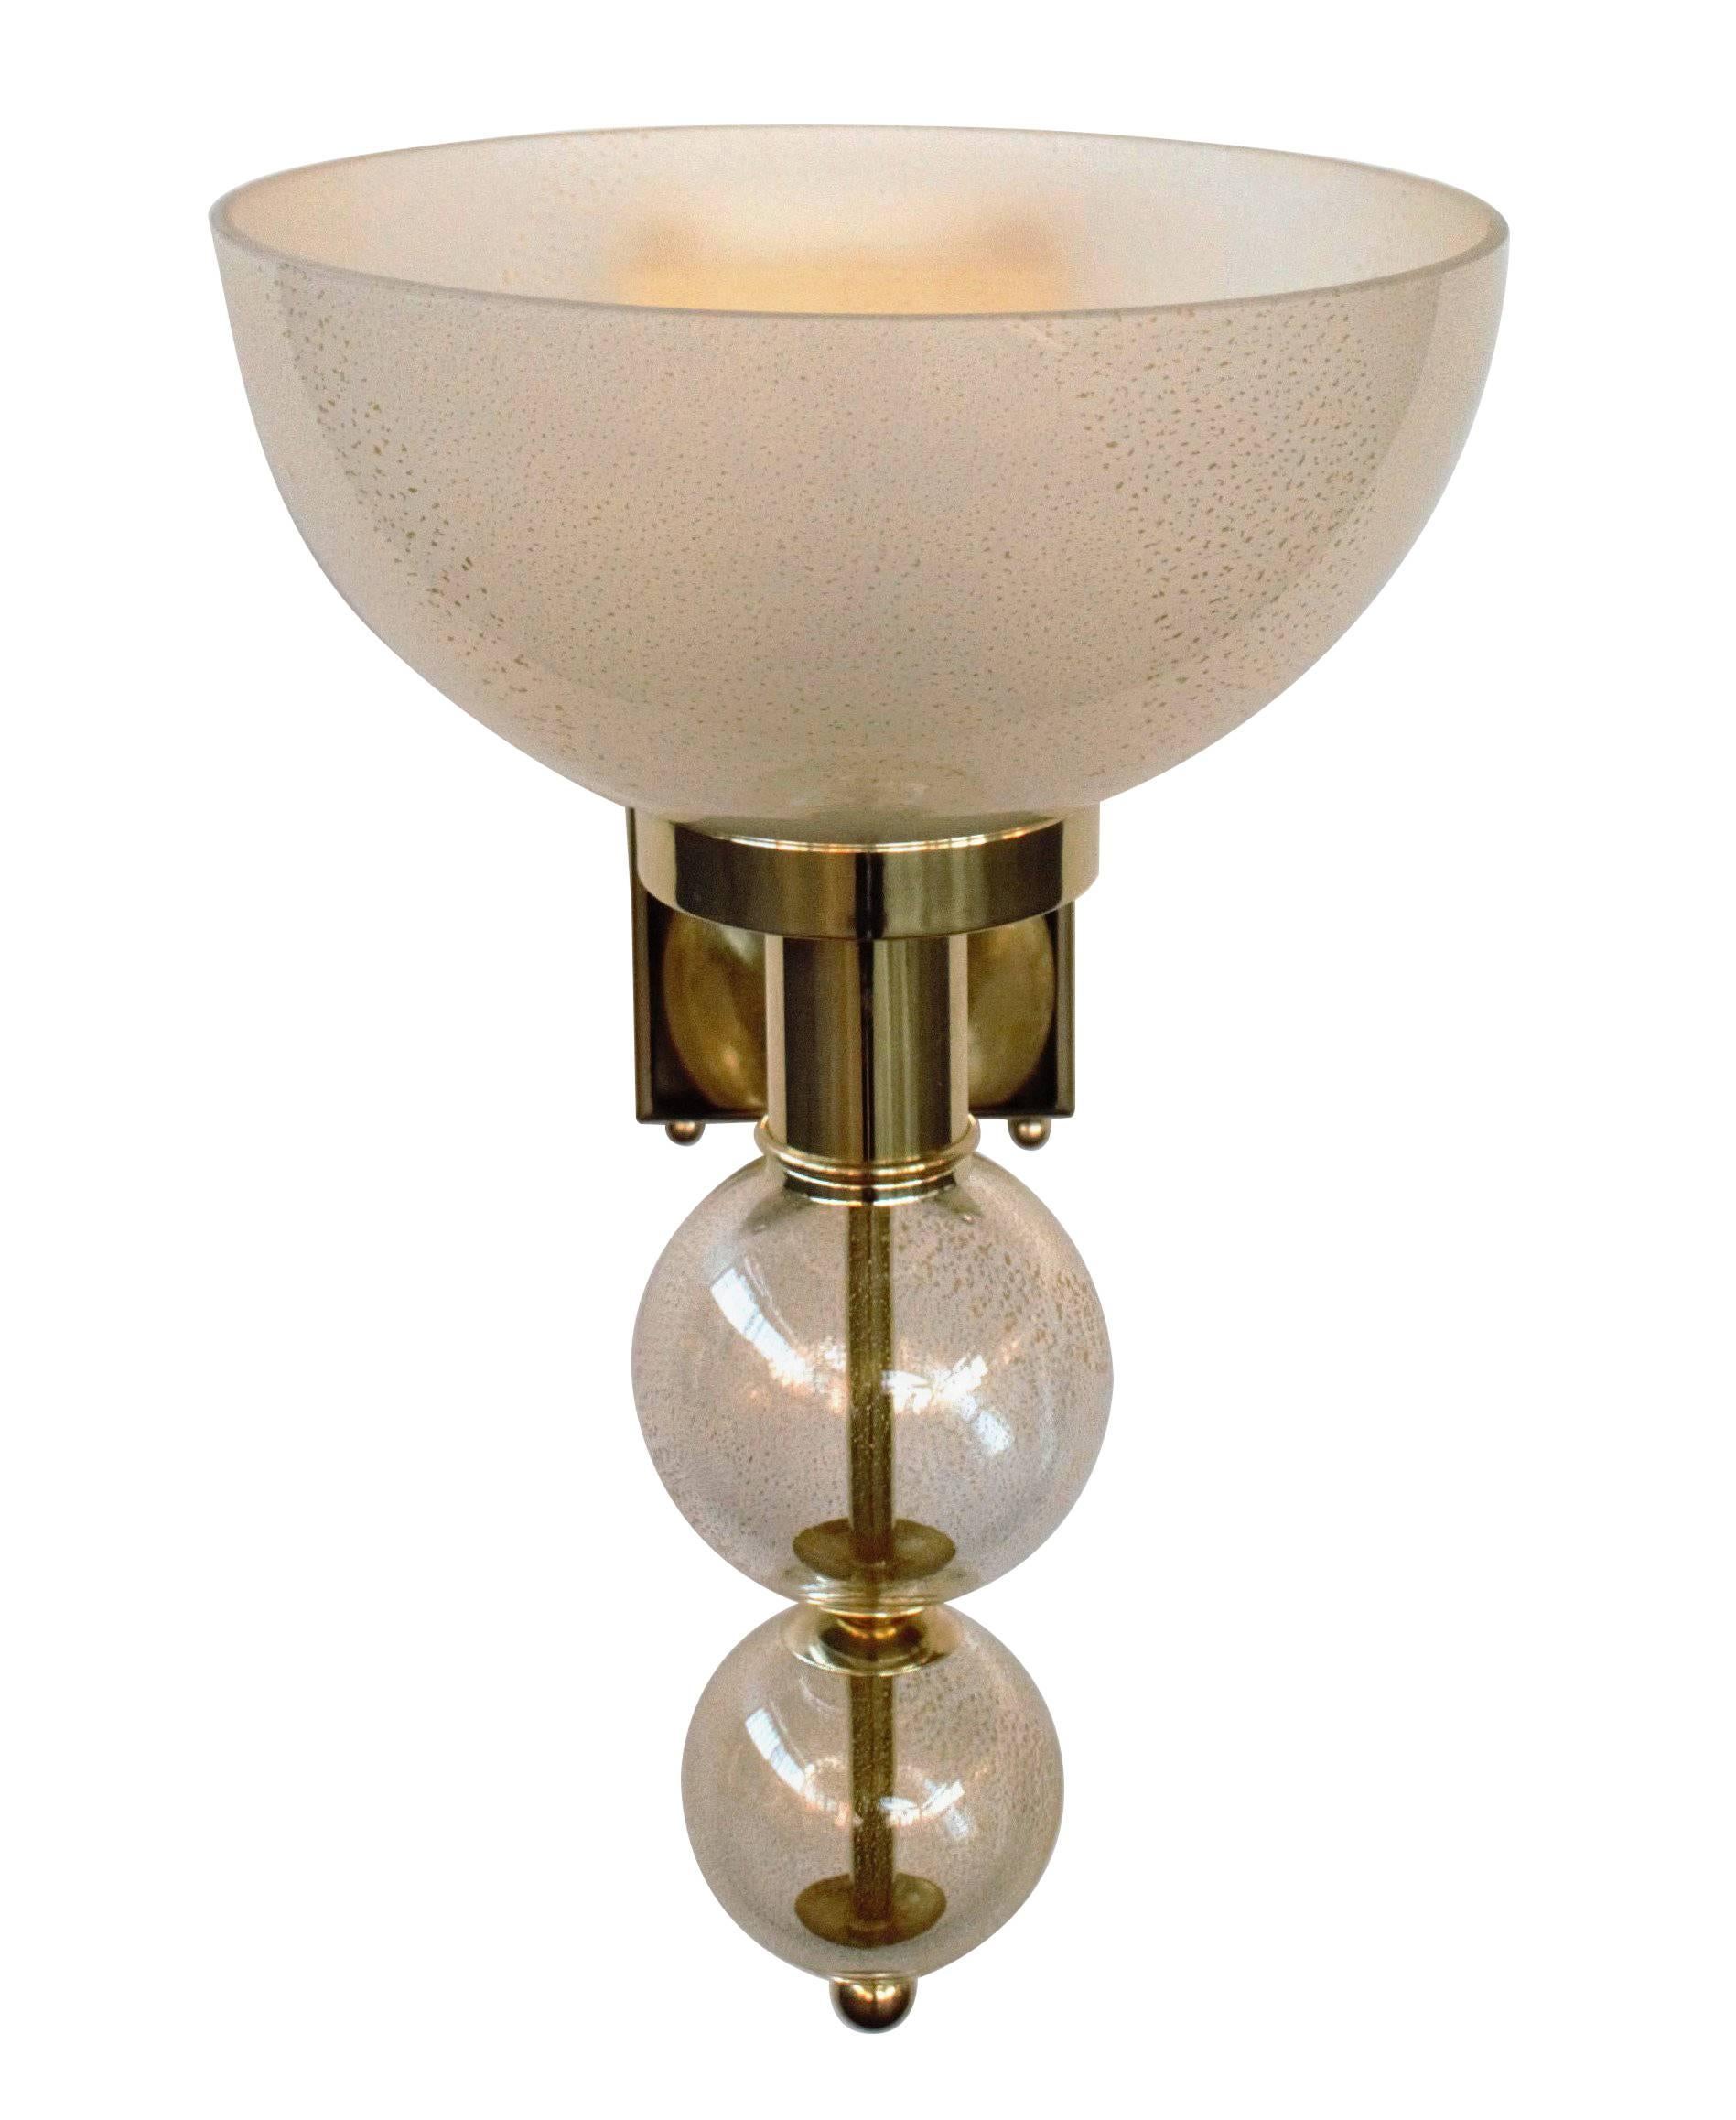 Italian wall light with clear and frosted Murano glass hand blow with gold flecks inside the glass, mounted on polished finish brass frame / Designed by Fabio Bergomi for Fabio Ltd / Made in Italy
1 light / E26 or E27 type / max 40W   
Height: 16